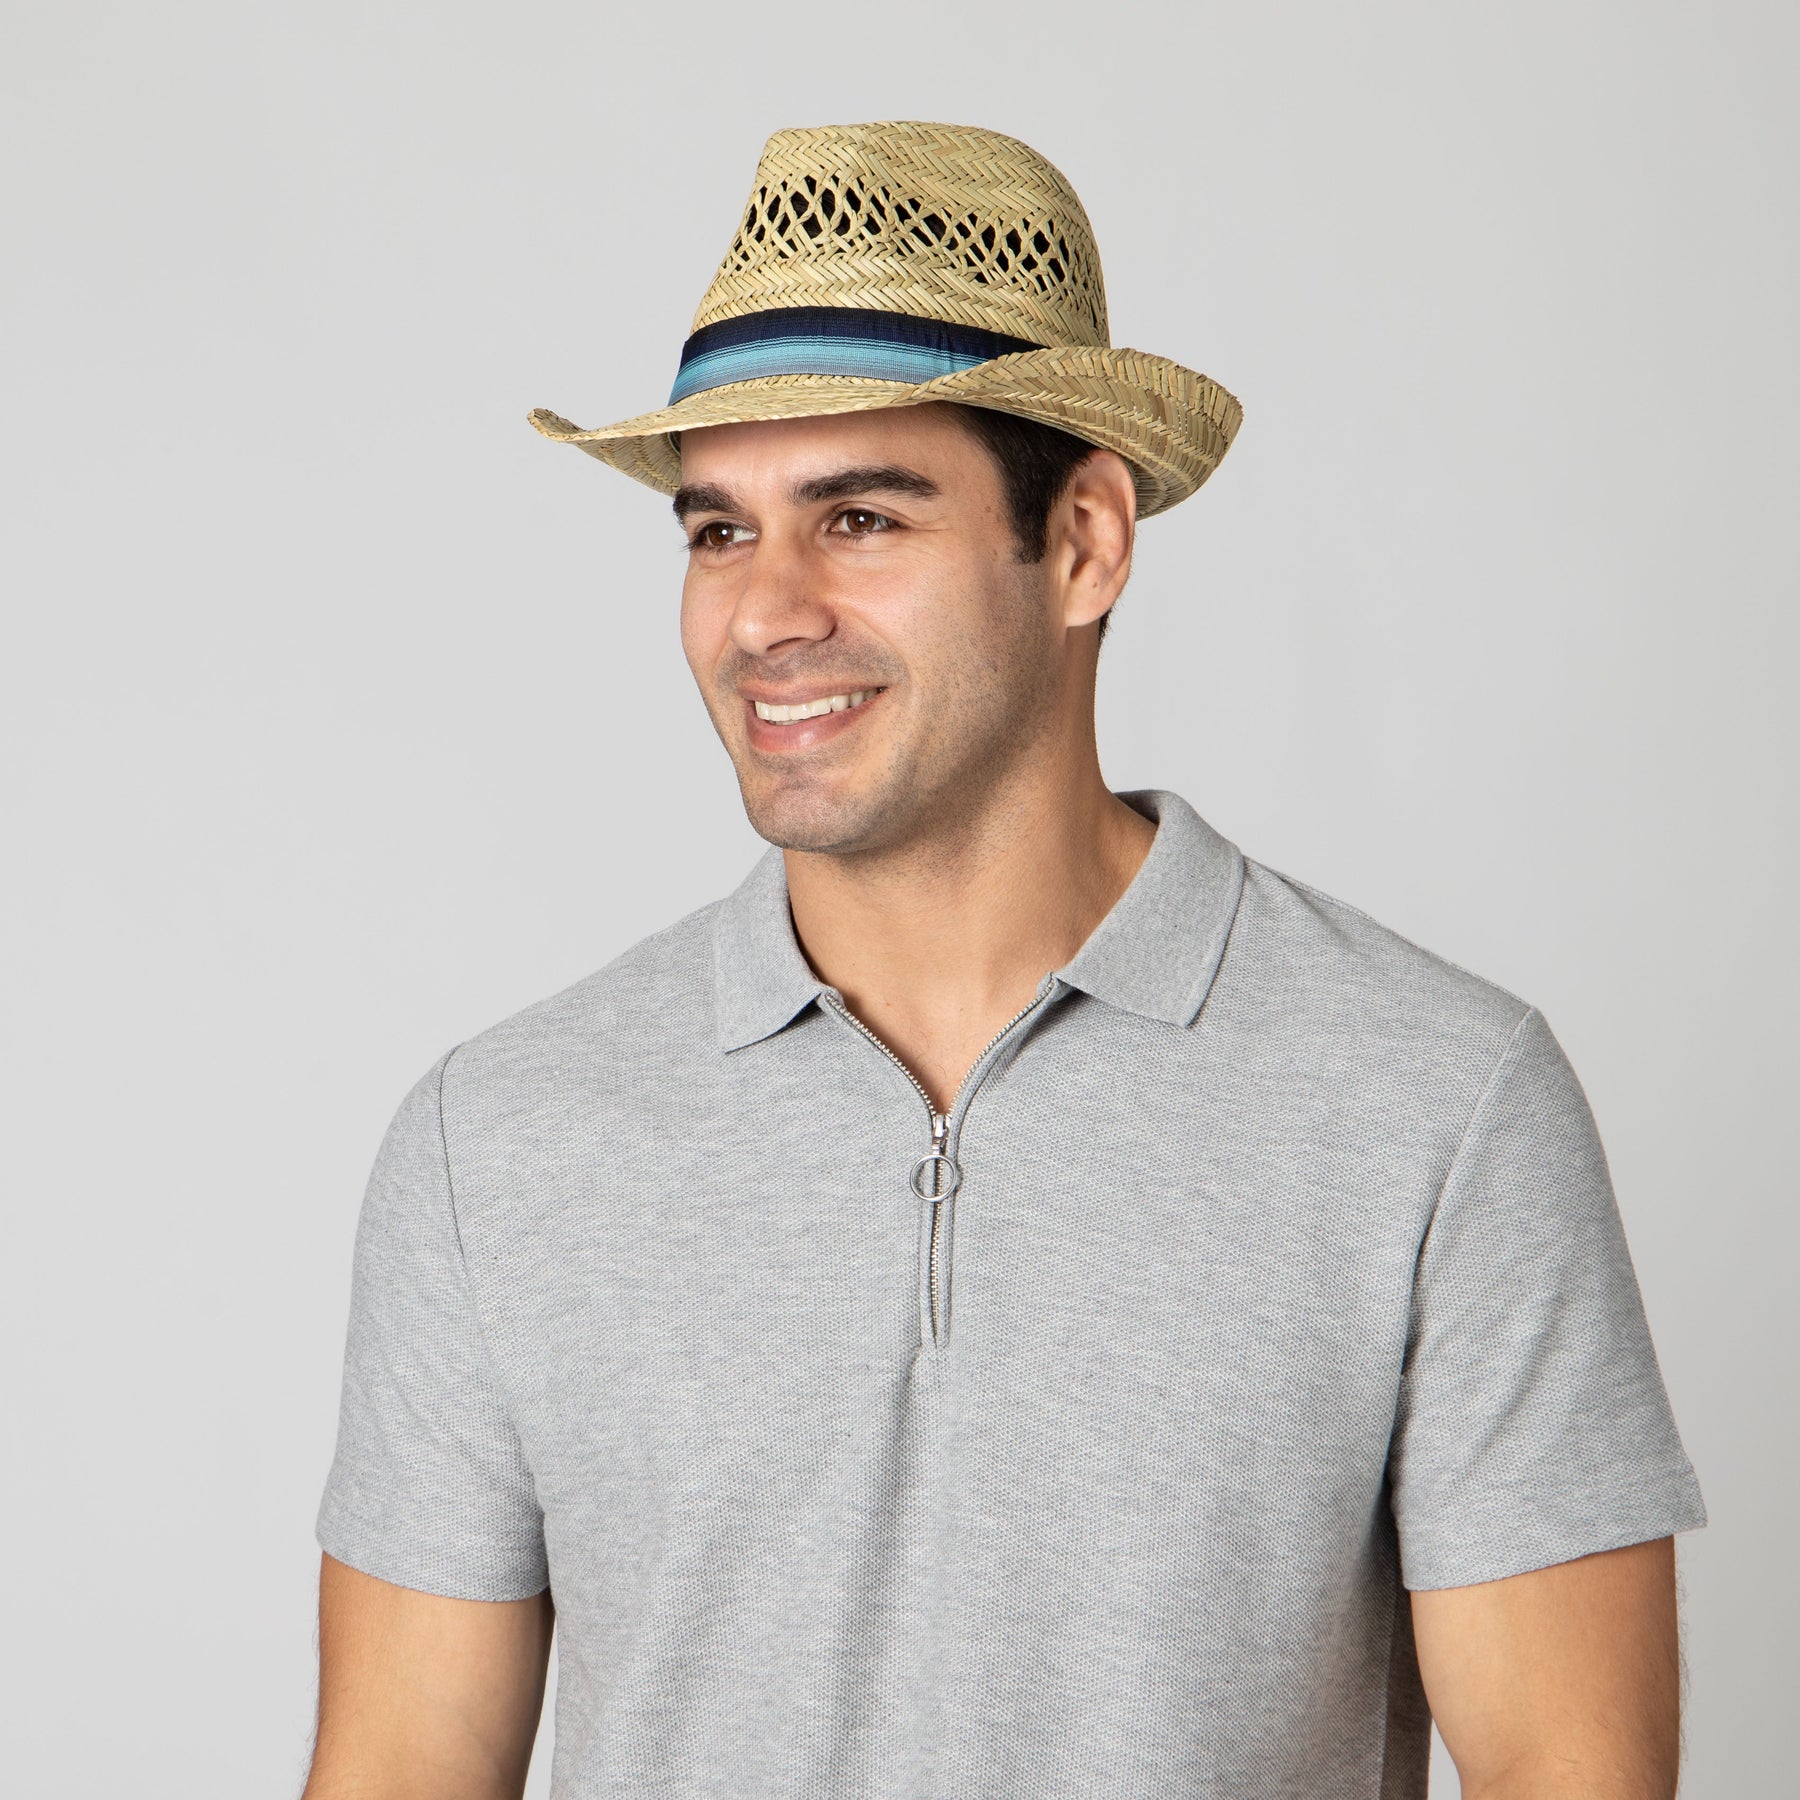 Mens Seagrass Fedora With Multi Color Inset – San Diego Hat Company